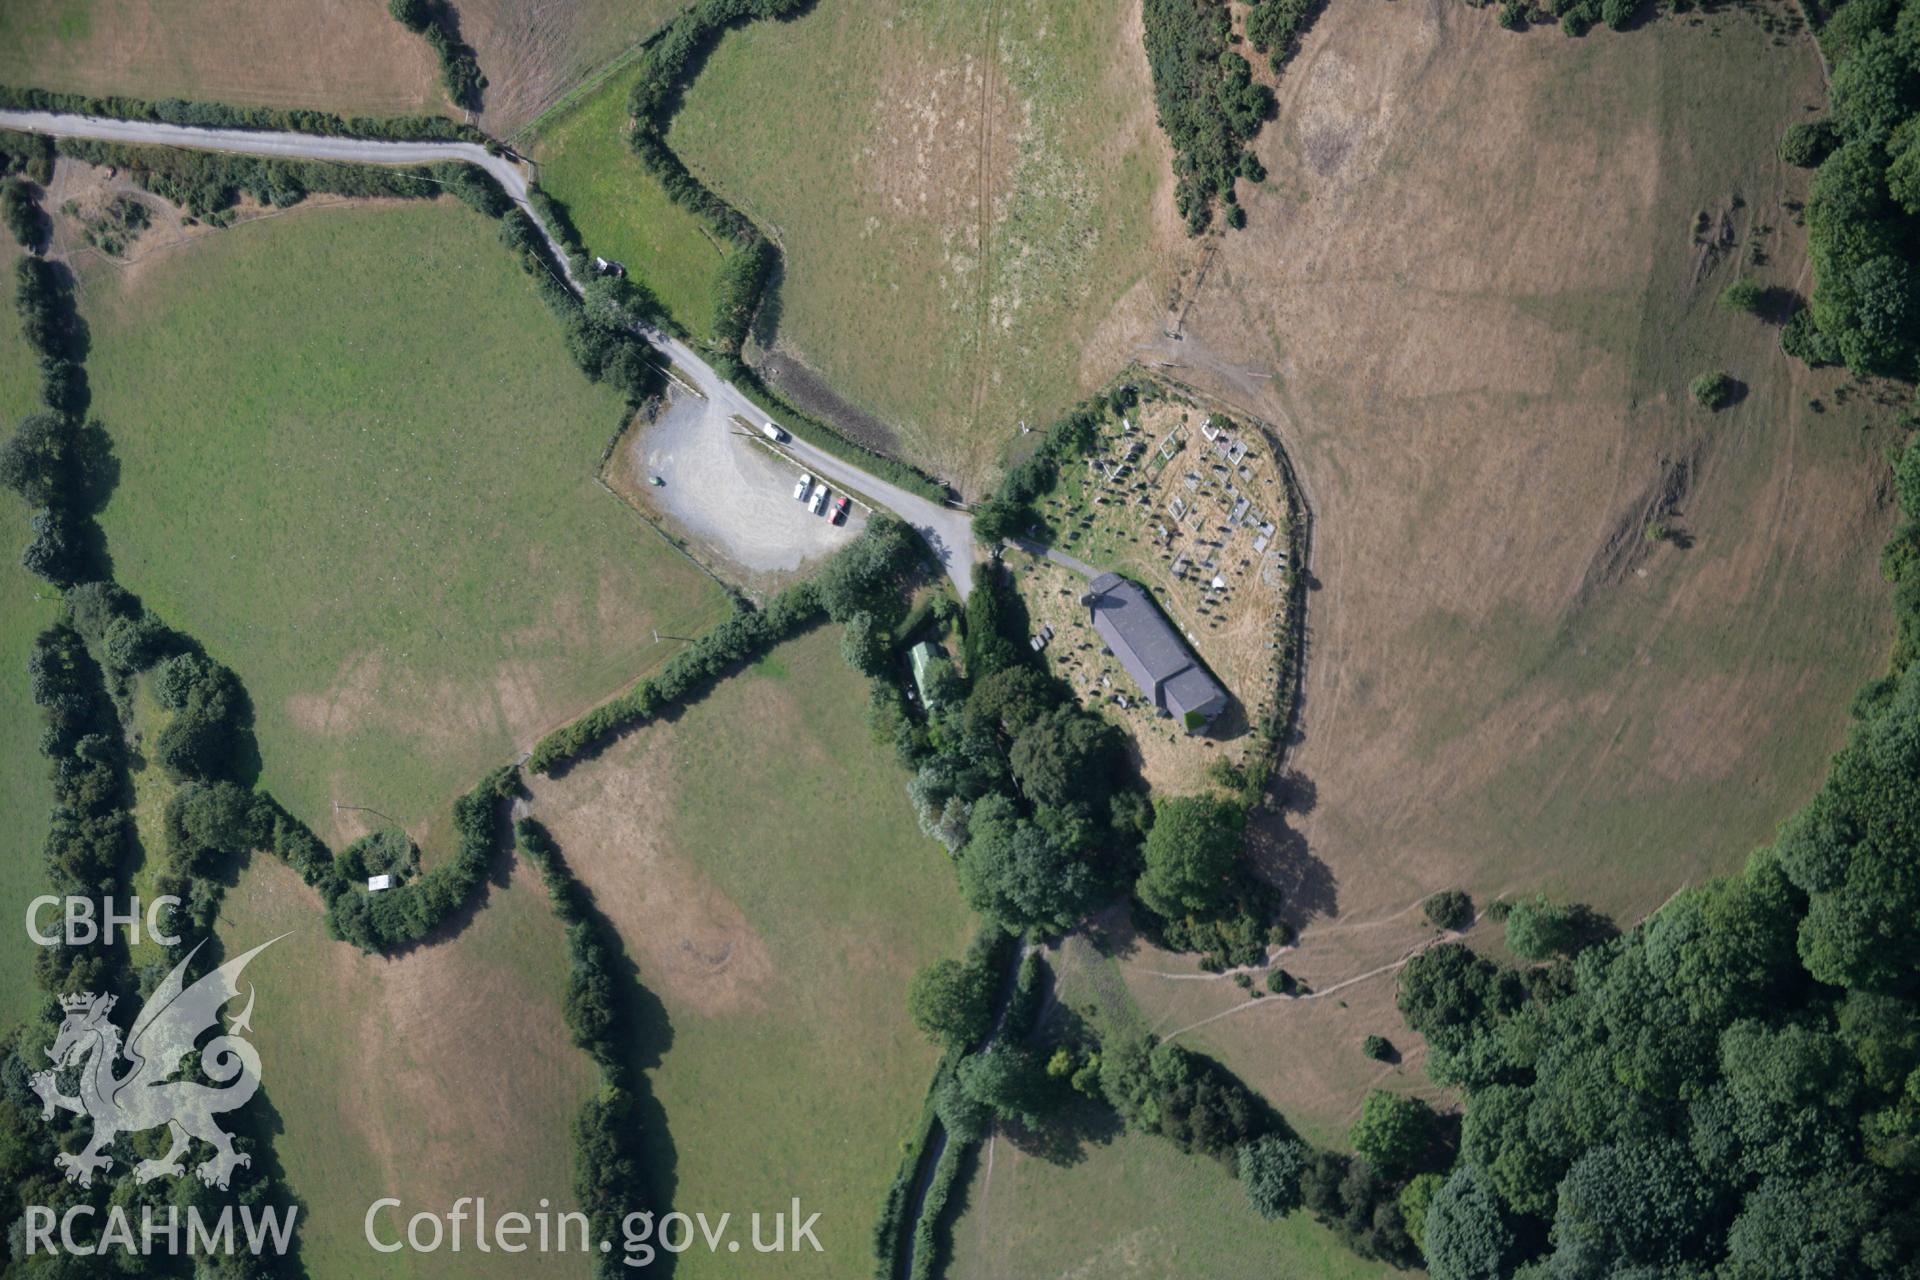 RCAHMW colour oblique aerial photograph of St Michael's Church, Llanfihangel Penbryn. Taken on 27 July 2006 by Toby Driver.